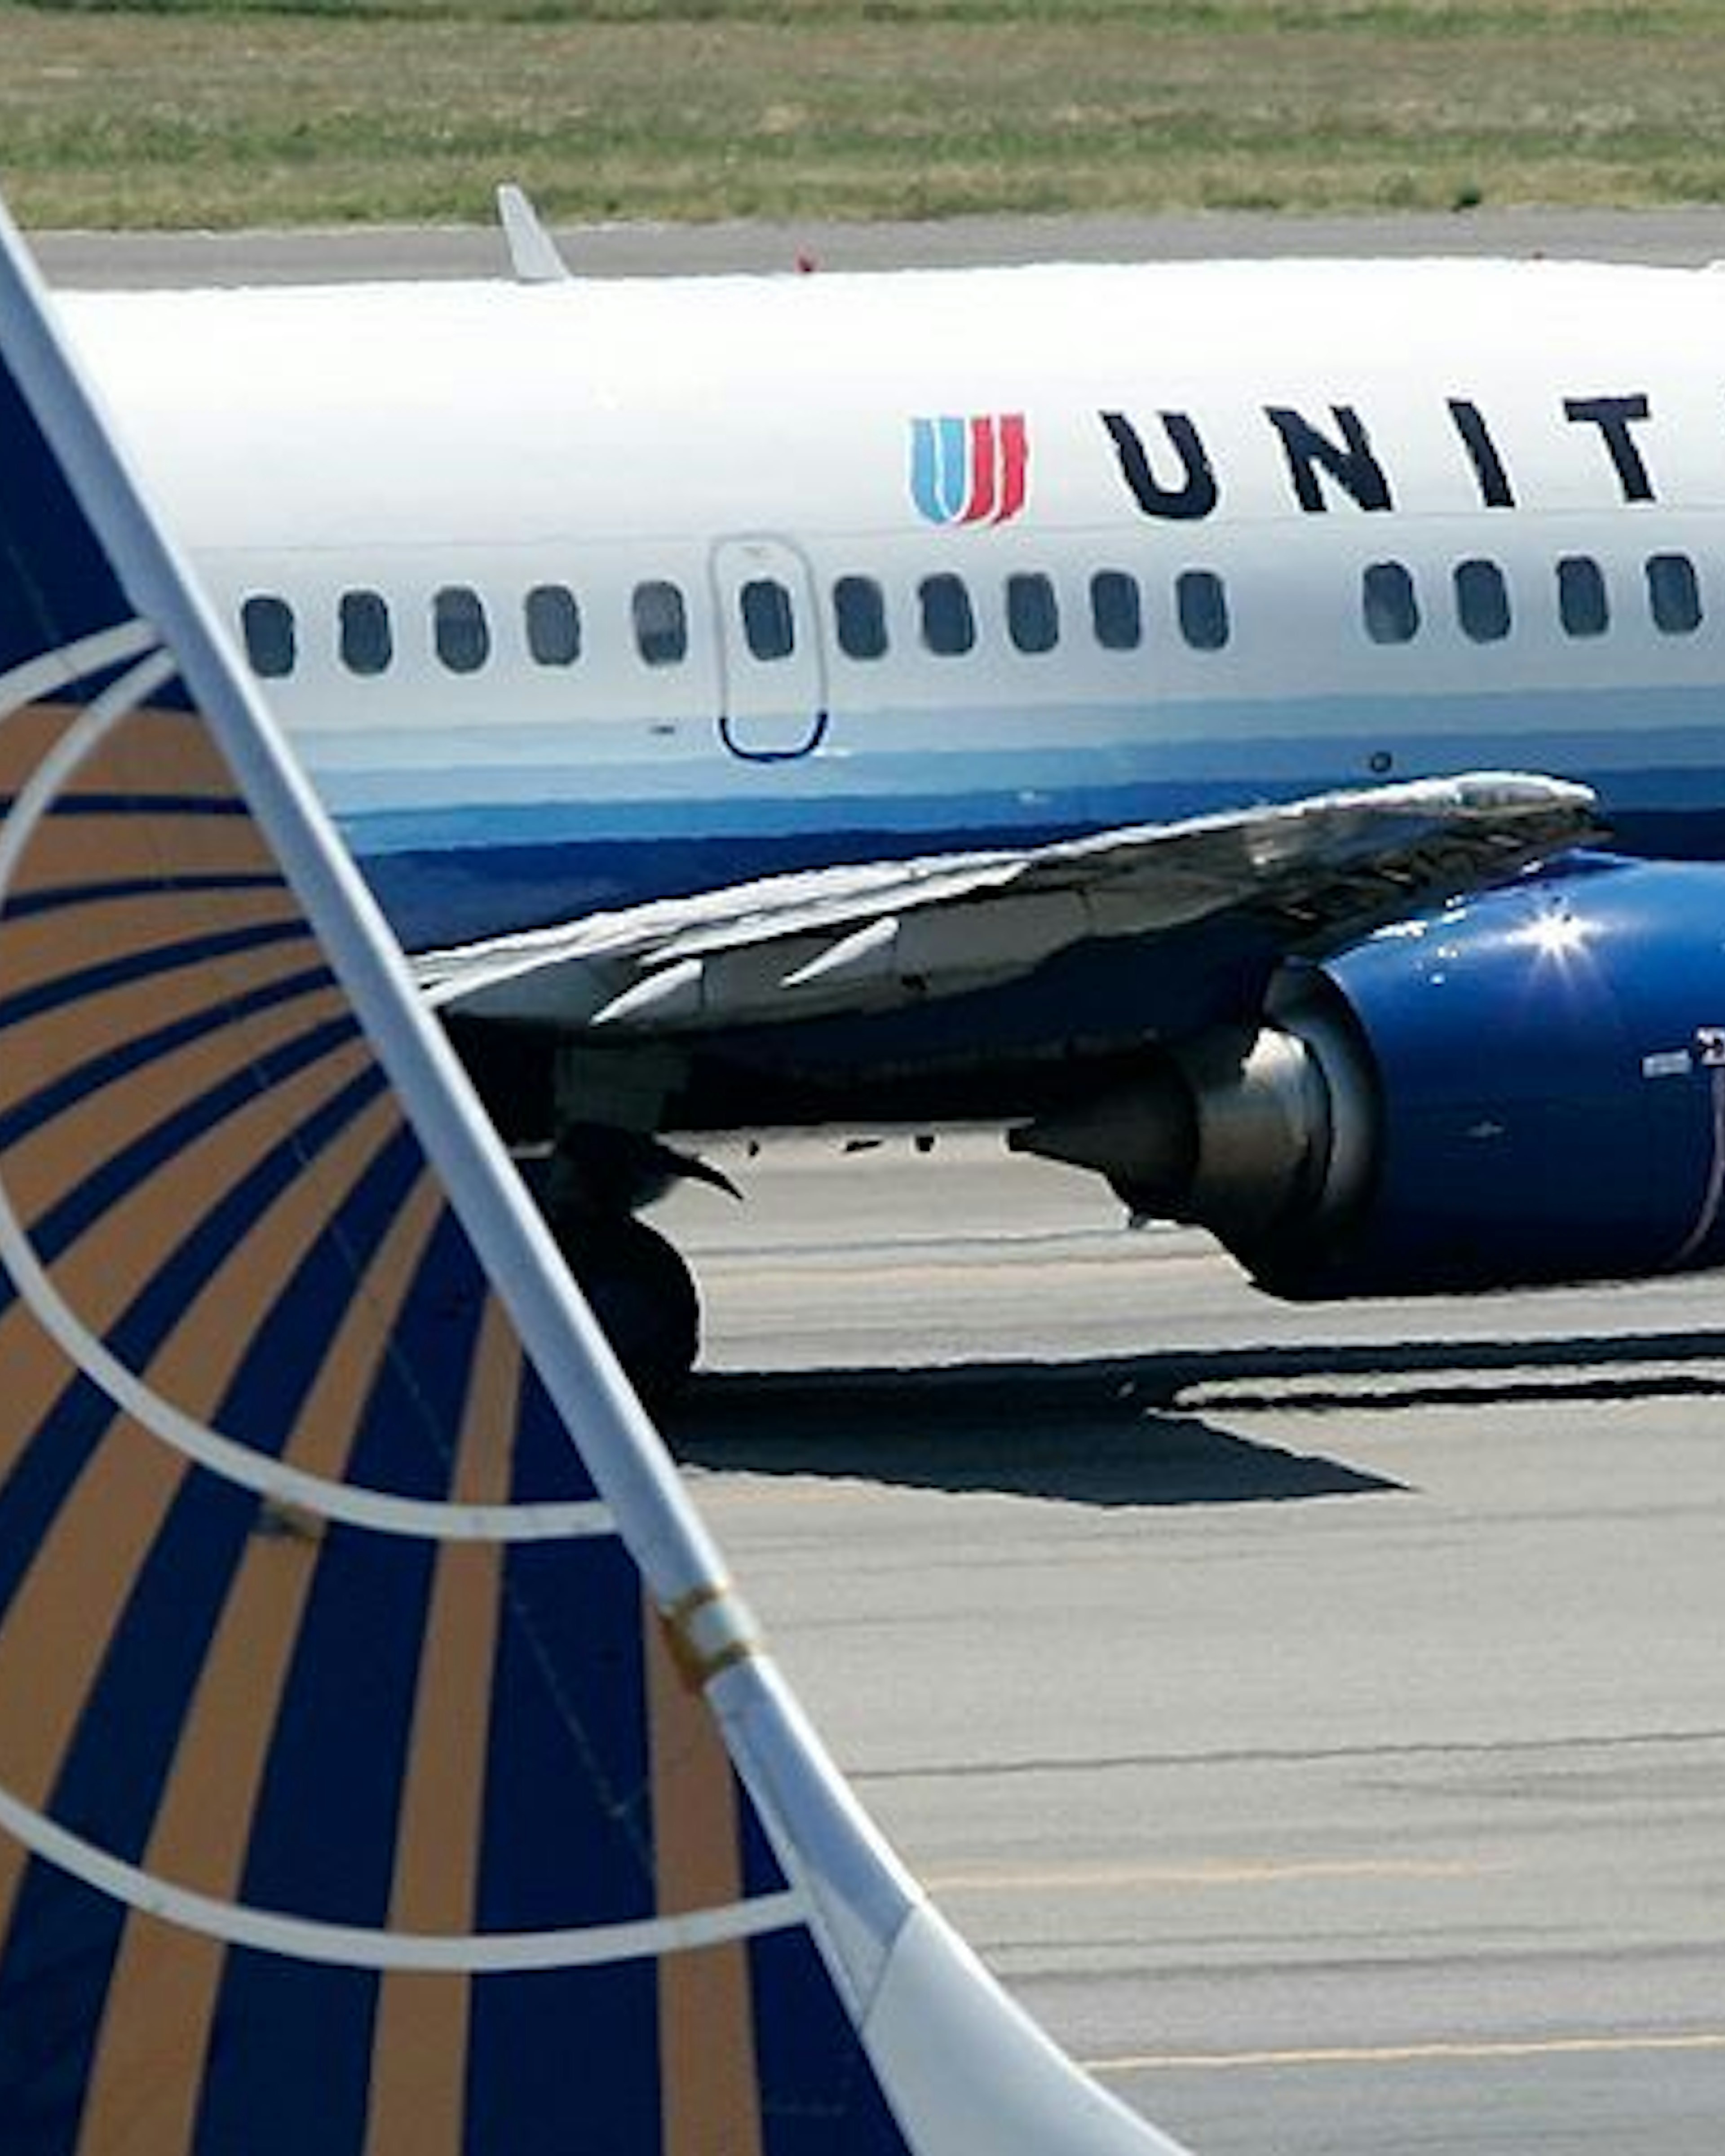 A United Airlines aircraft passes by a Continental Airlines aircraft as it taxis to takeoff from the runway of Ronald Reagan National Airport August 16, 2006 in Washington, DC. (Photo by Alex Wong/Getty Images)